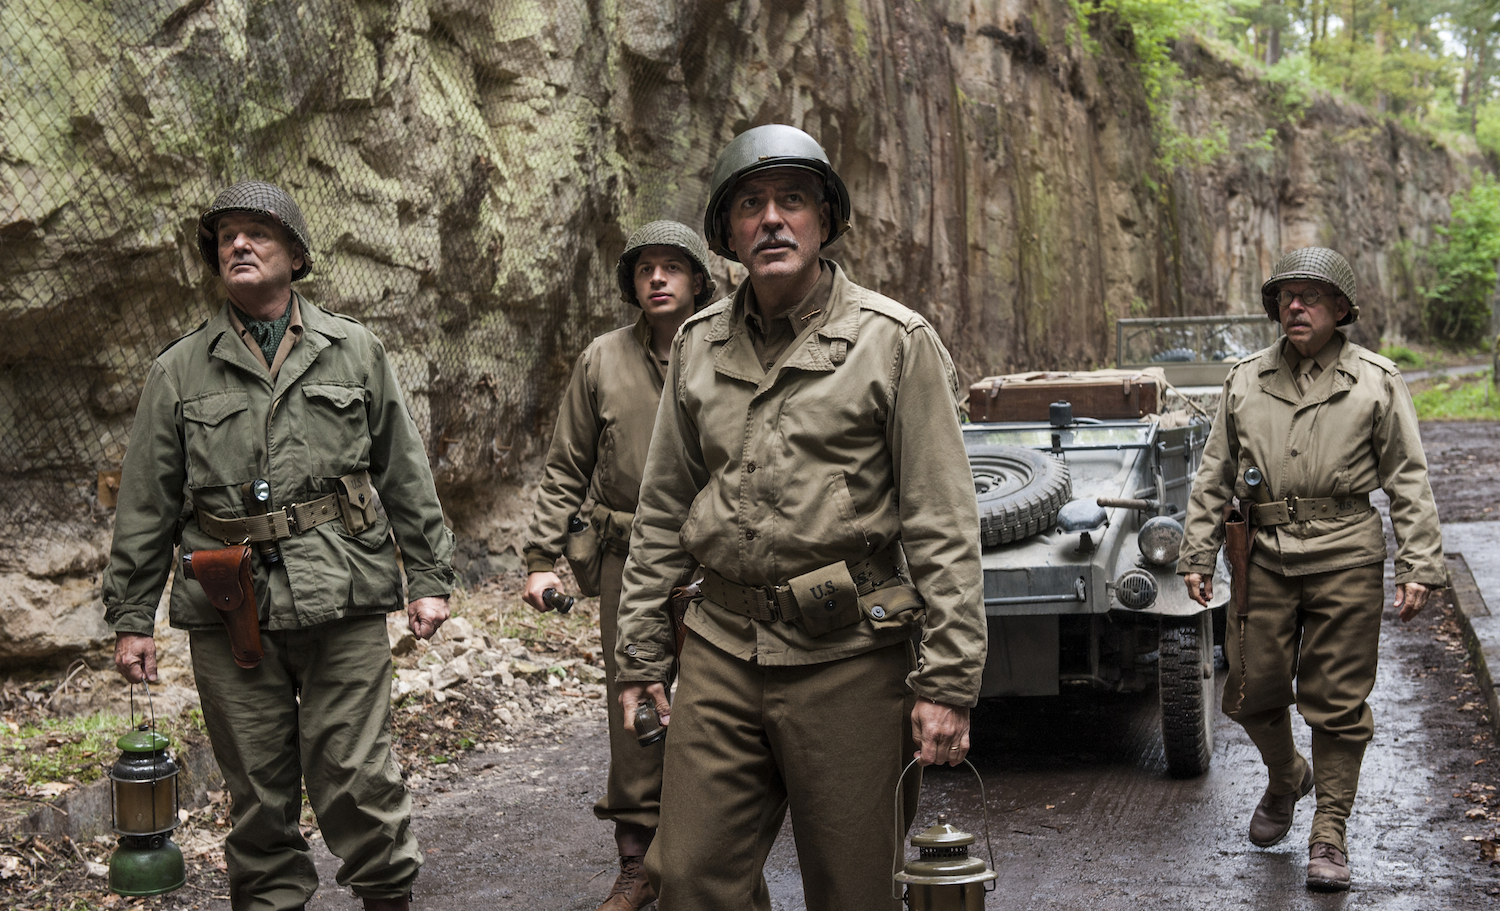 The Monuments Men (Movie Review)